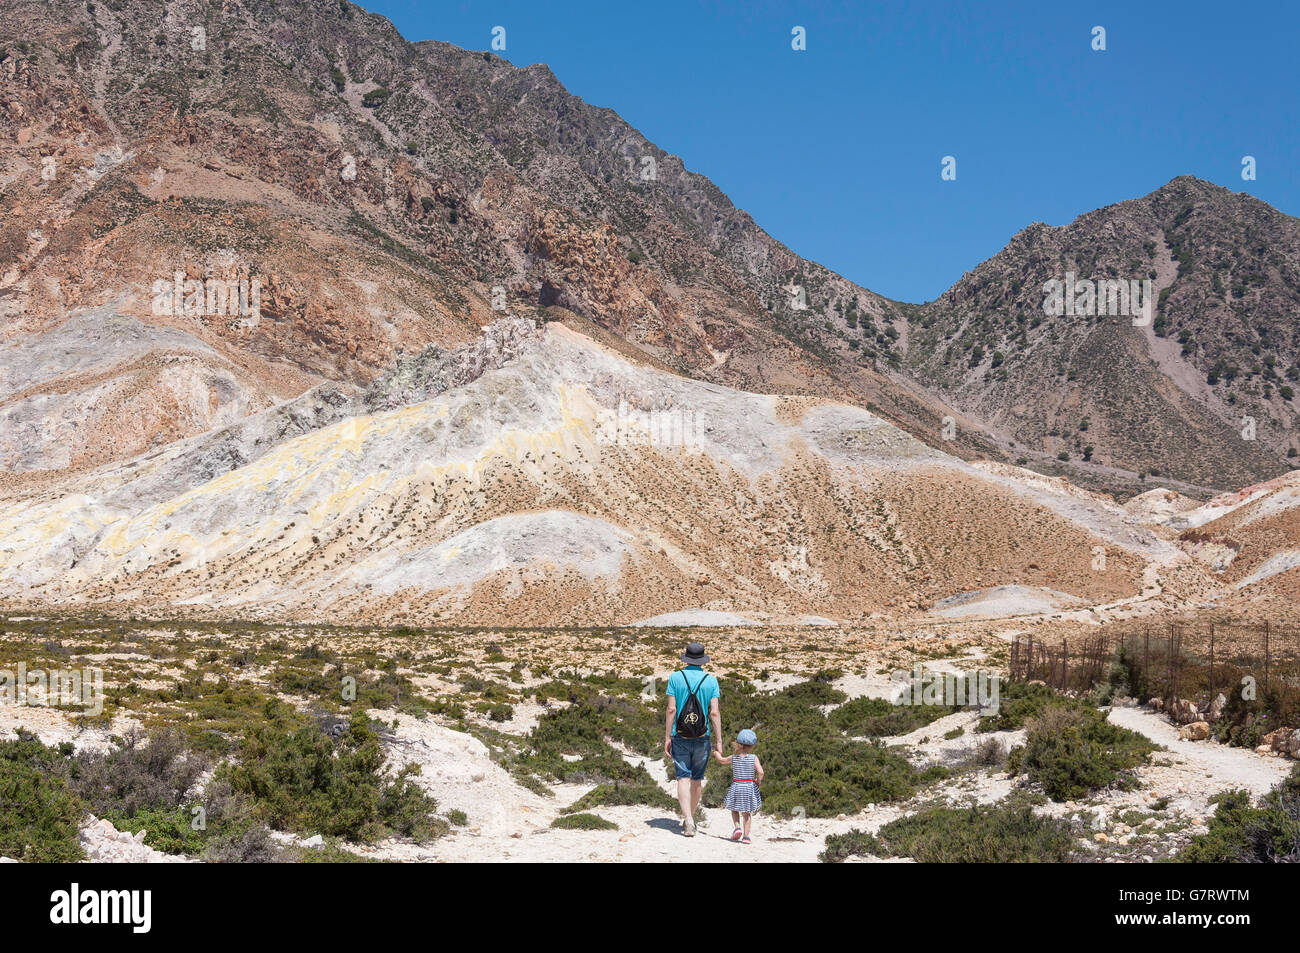 Father and daughter walking near Stefanos volcanic crater, Nisyros (Nissyros), The Dodecanese, South Aegean Region, Greece Stock Photo